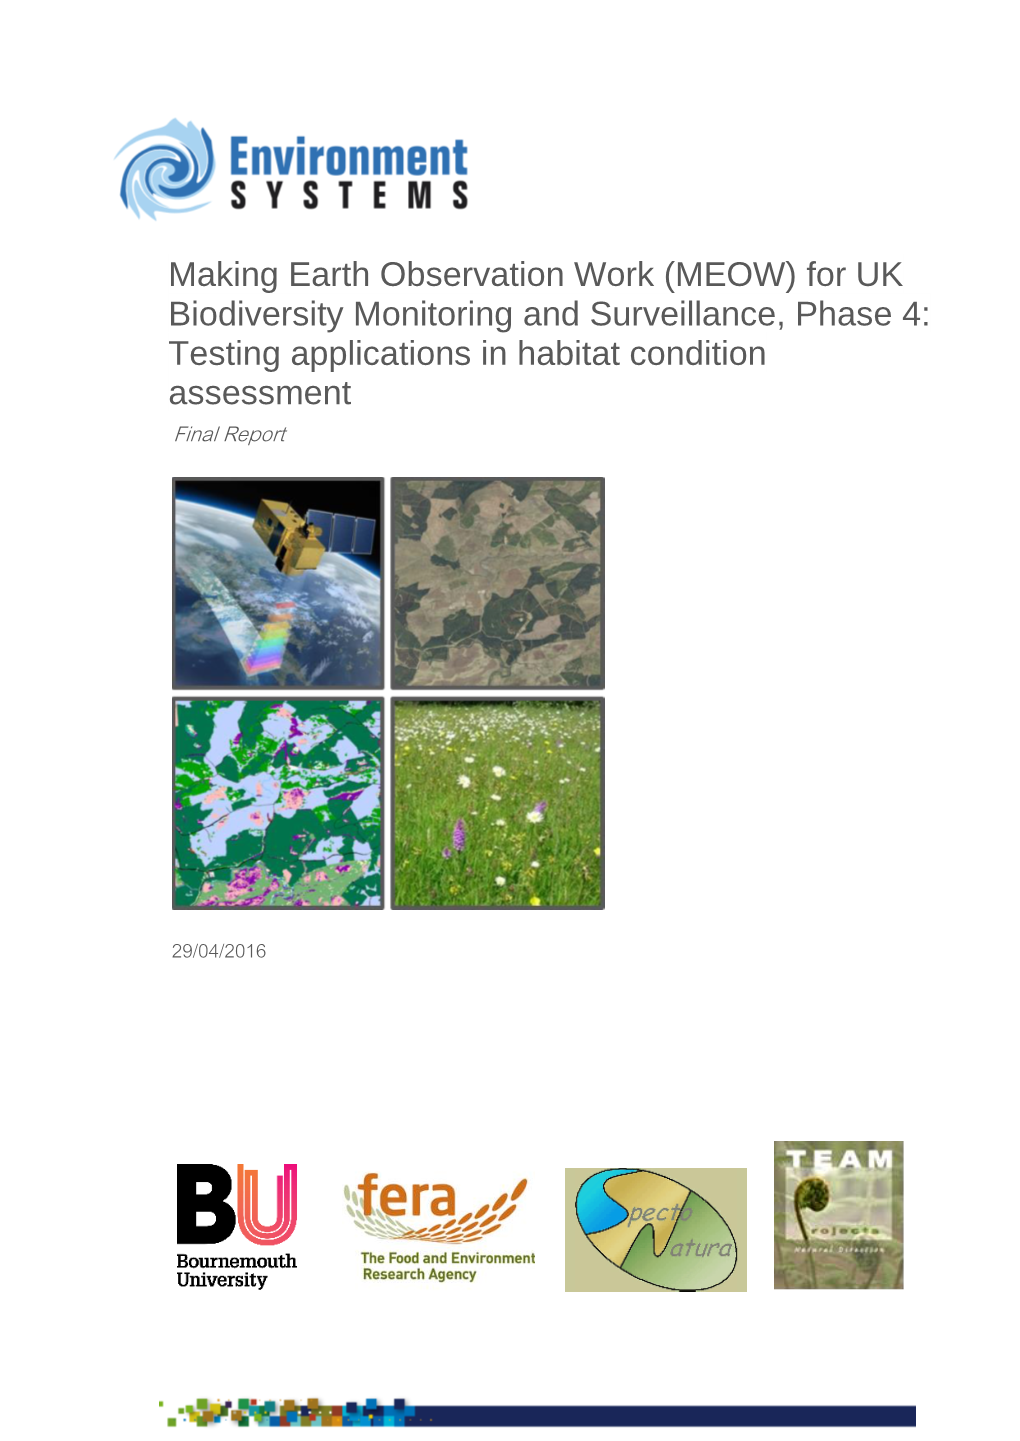 Making Earth Observation Work (MEOW) for UK Biodiversity Monitoring and Surveillance, Phase 4: Testing Applications in Habitat Condition Assessment Final Report